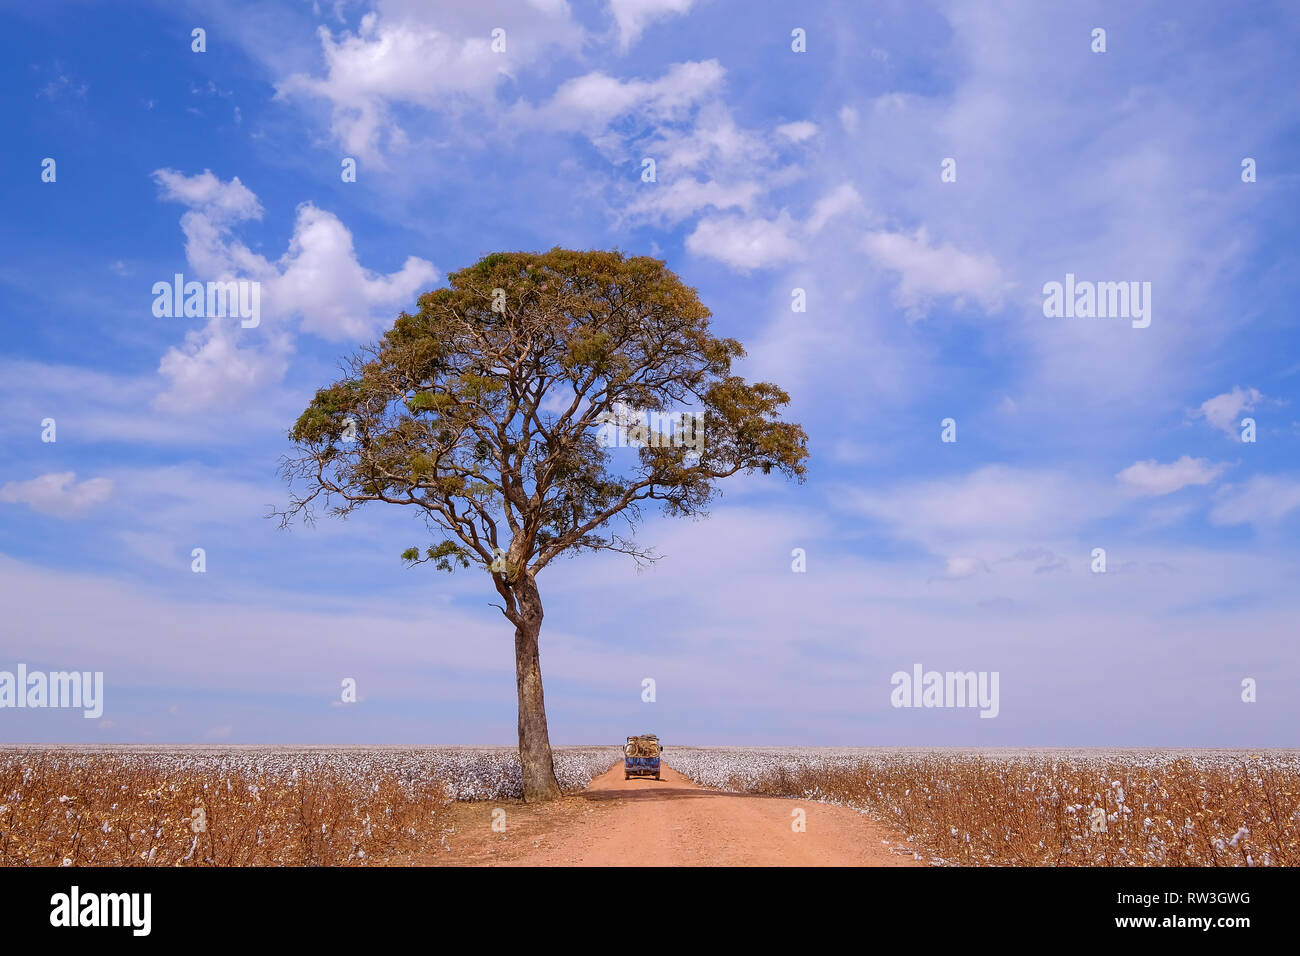 Old german vintage campervan and tree in the middle of a cotton field in Campo Verde, Mato Grosso, Brazil Stock Photo